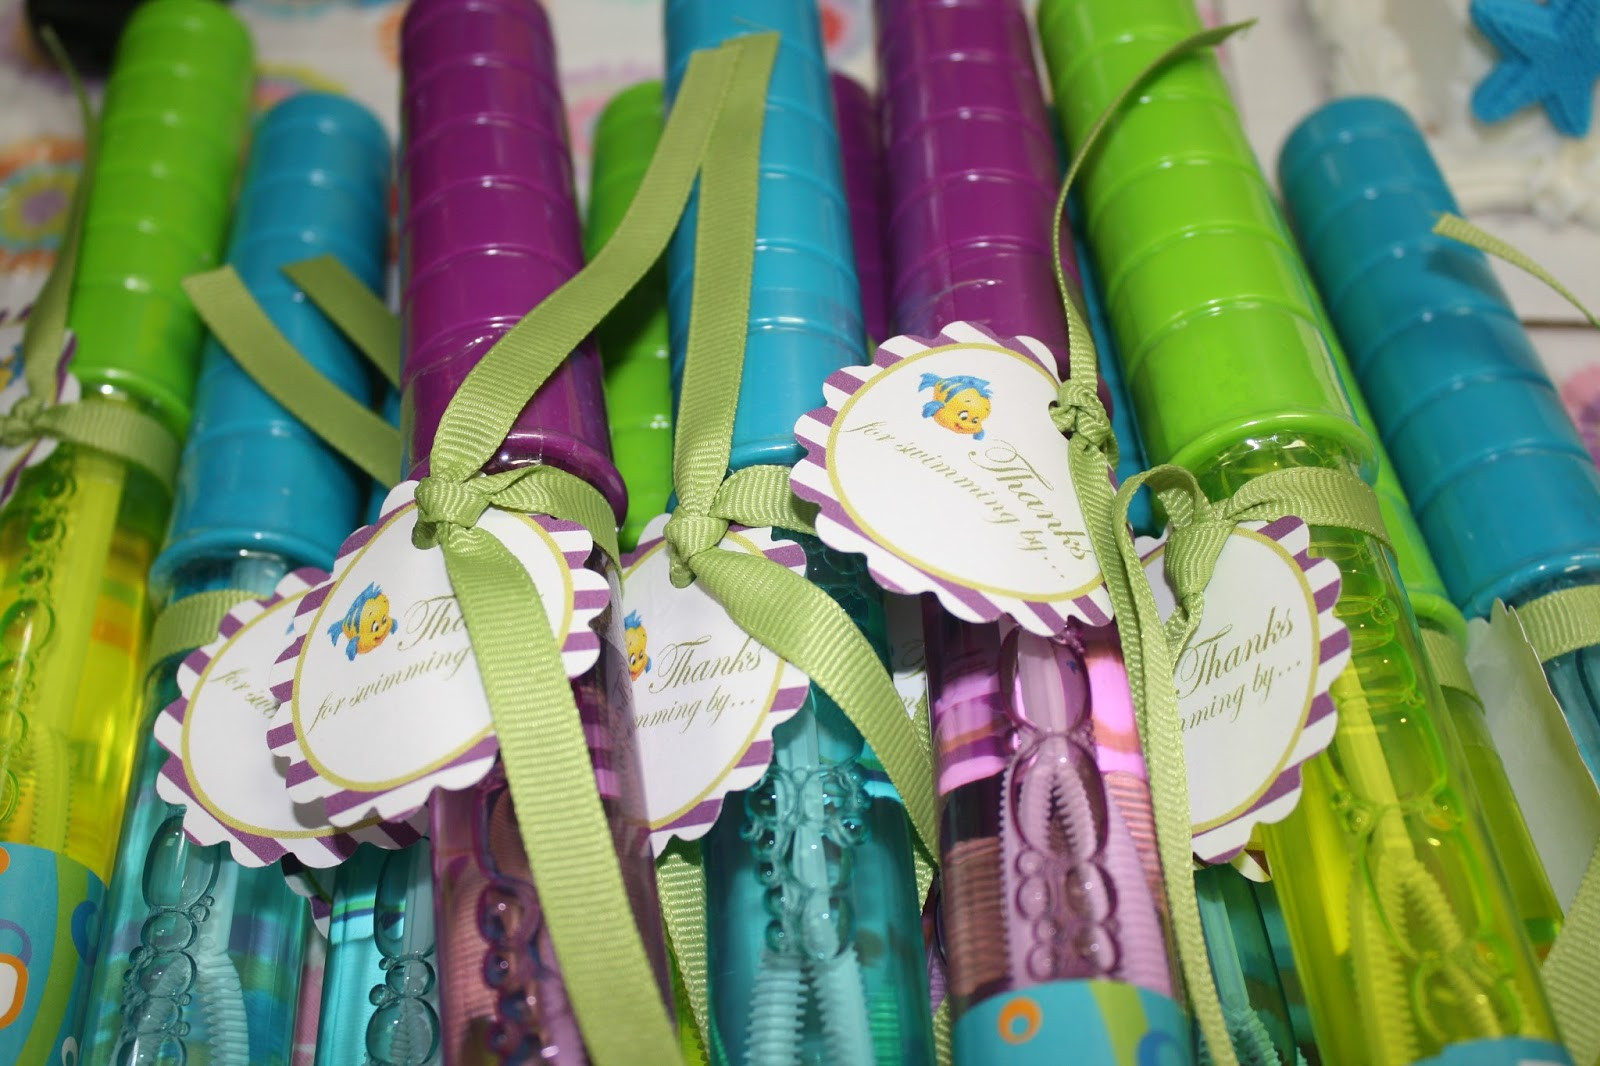 Little Mermaid Party Favor Ideas
 Free Party Printable for Under the Sea Little Mermaid